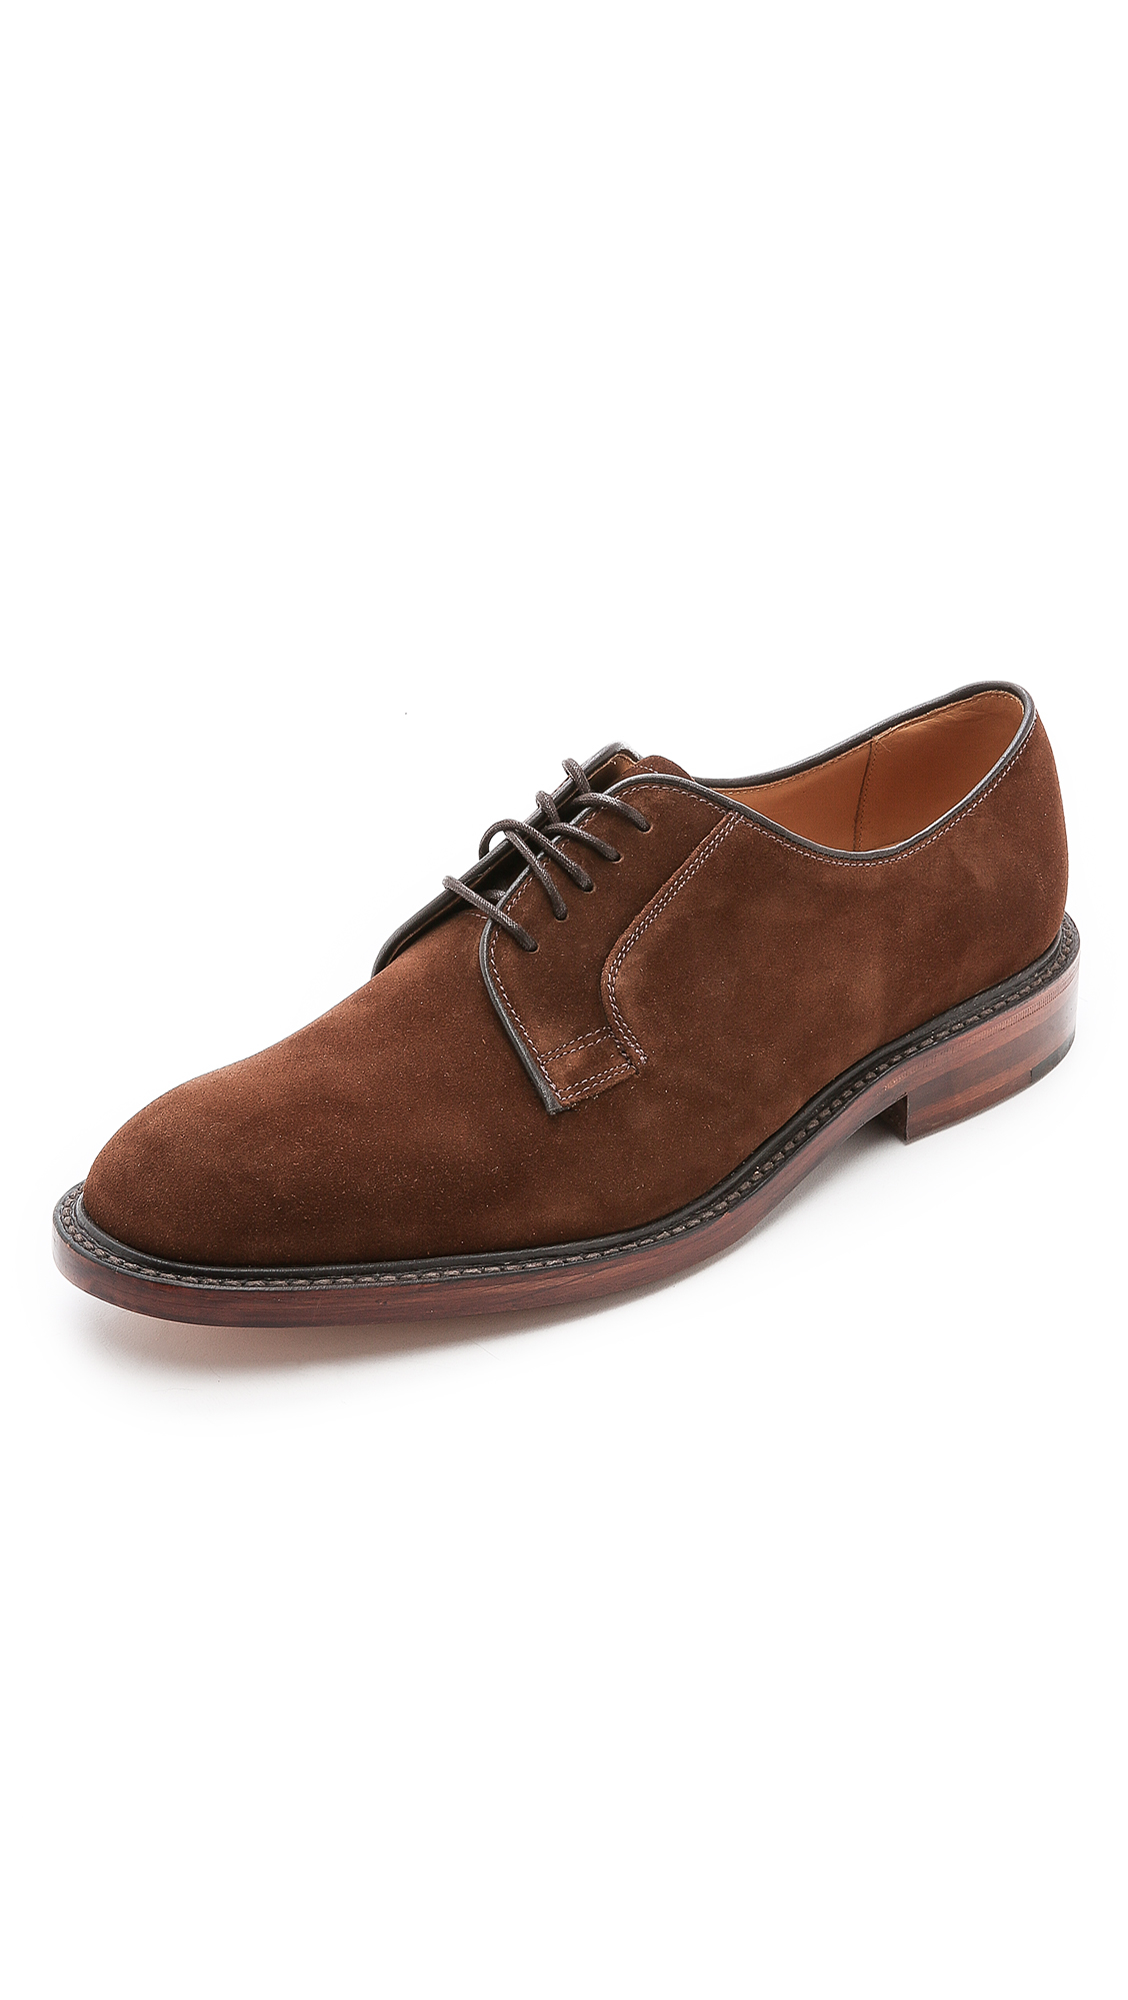 Loake Suede Perth Plain Toe Derby Shoes in Brown for Men - Lyst